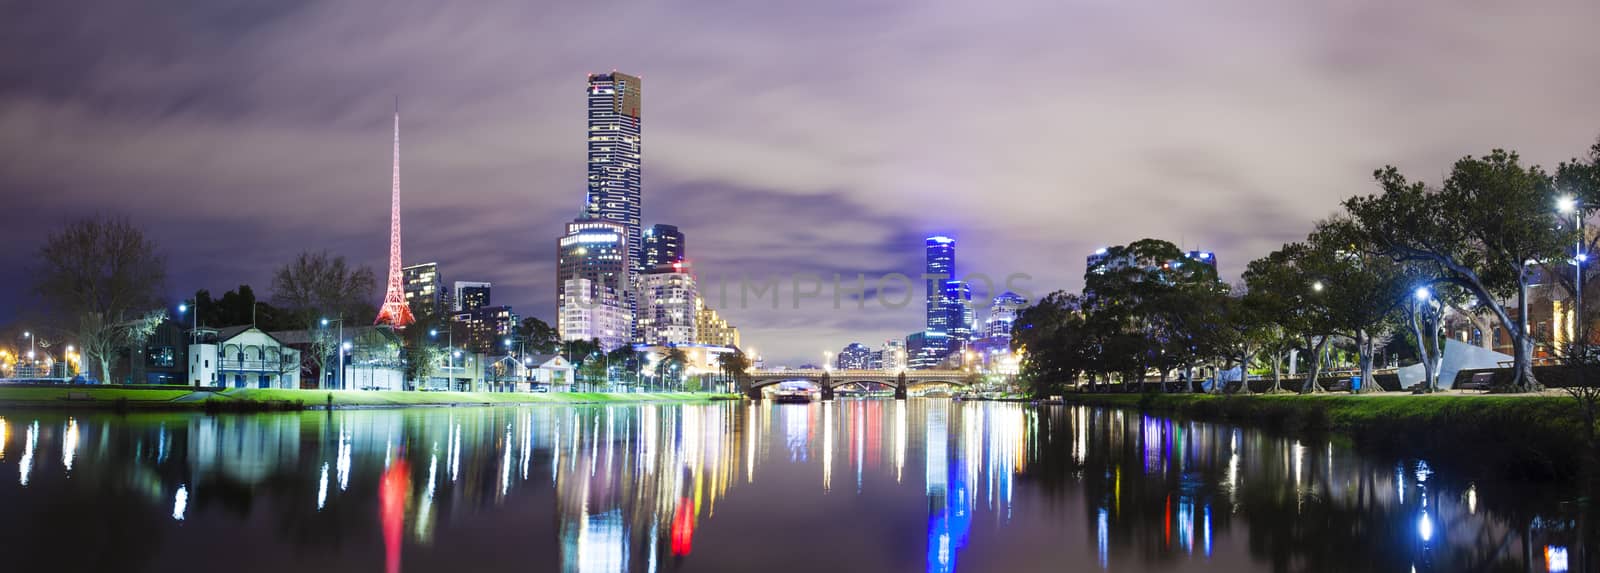 Skycrapers along the Yarra River in Melbourne by ymgerman